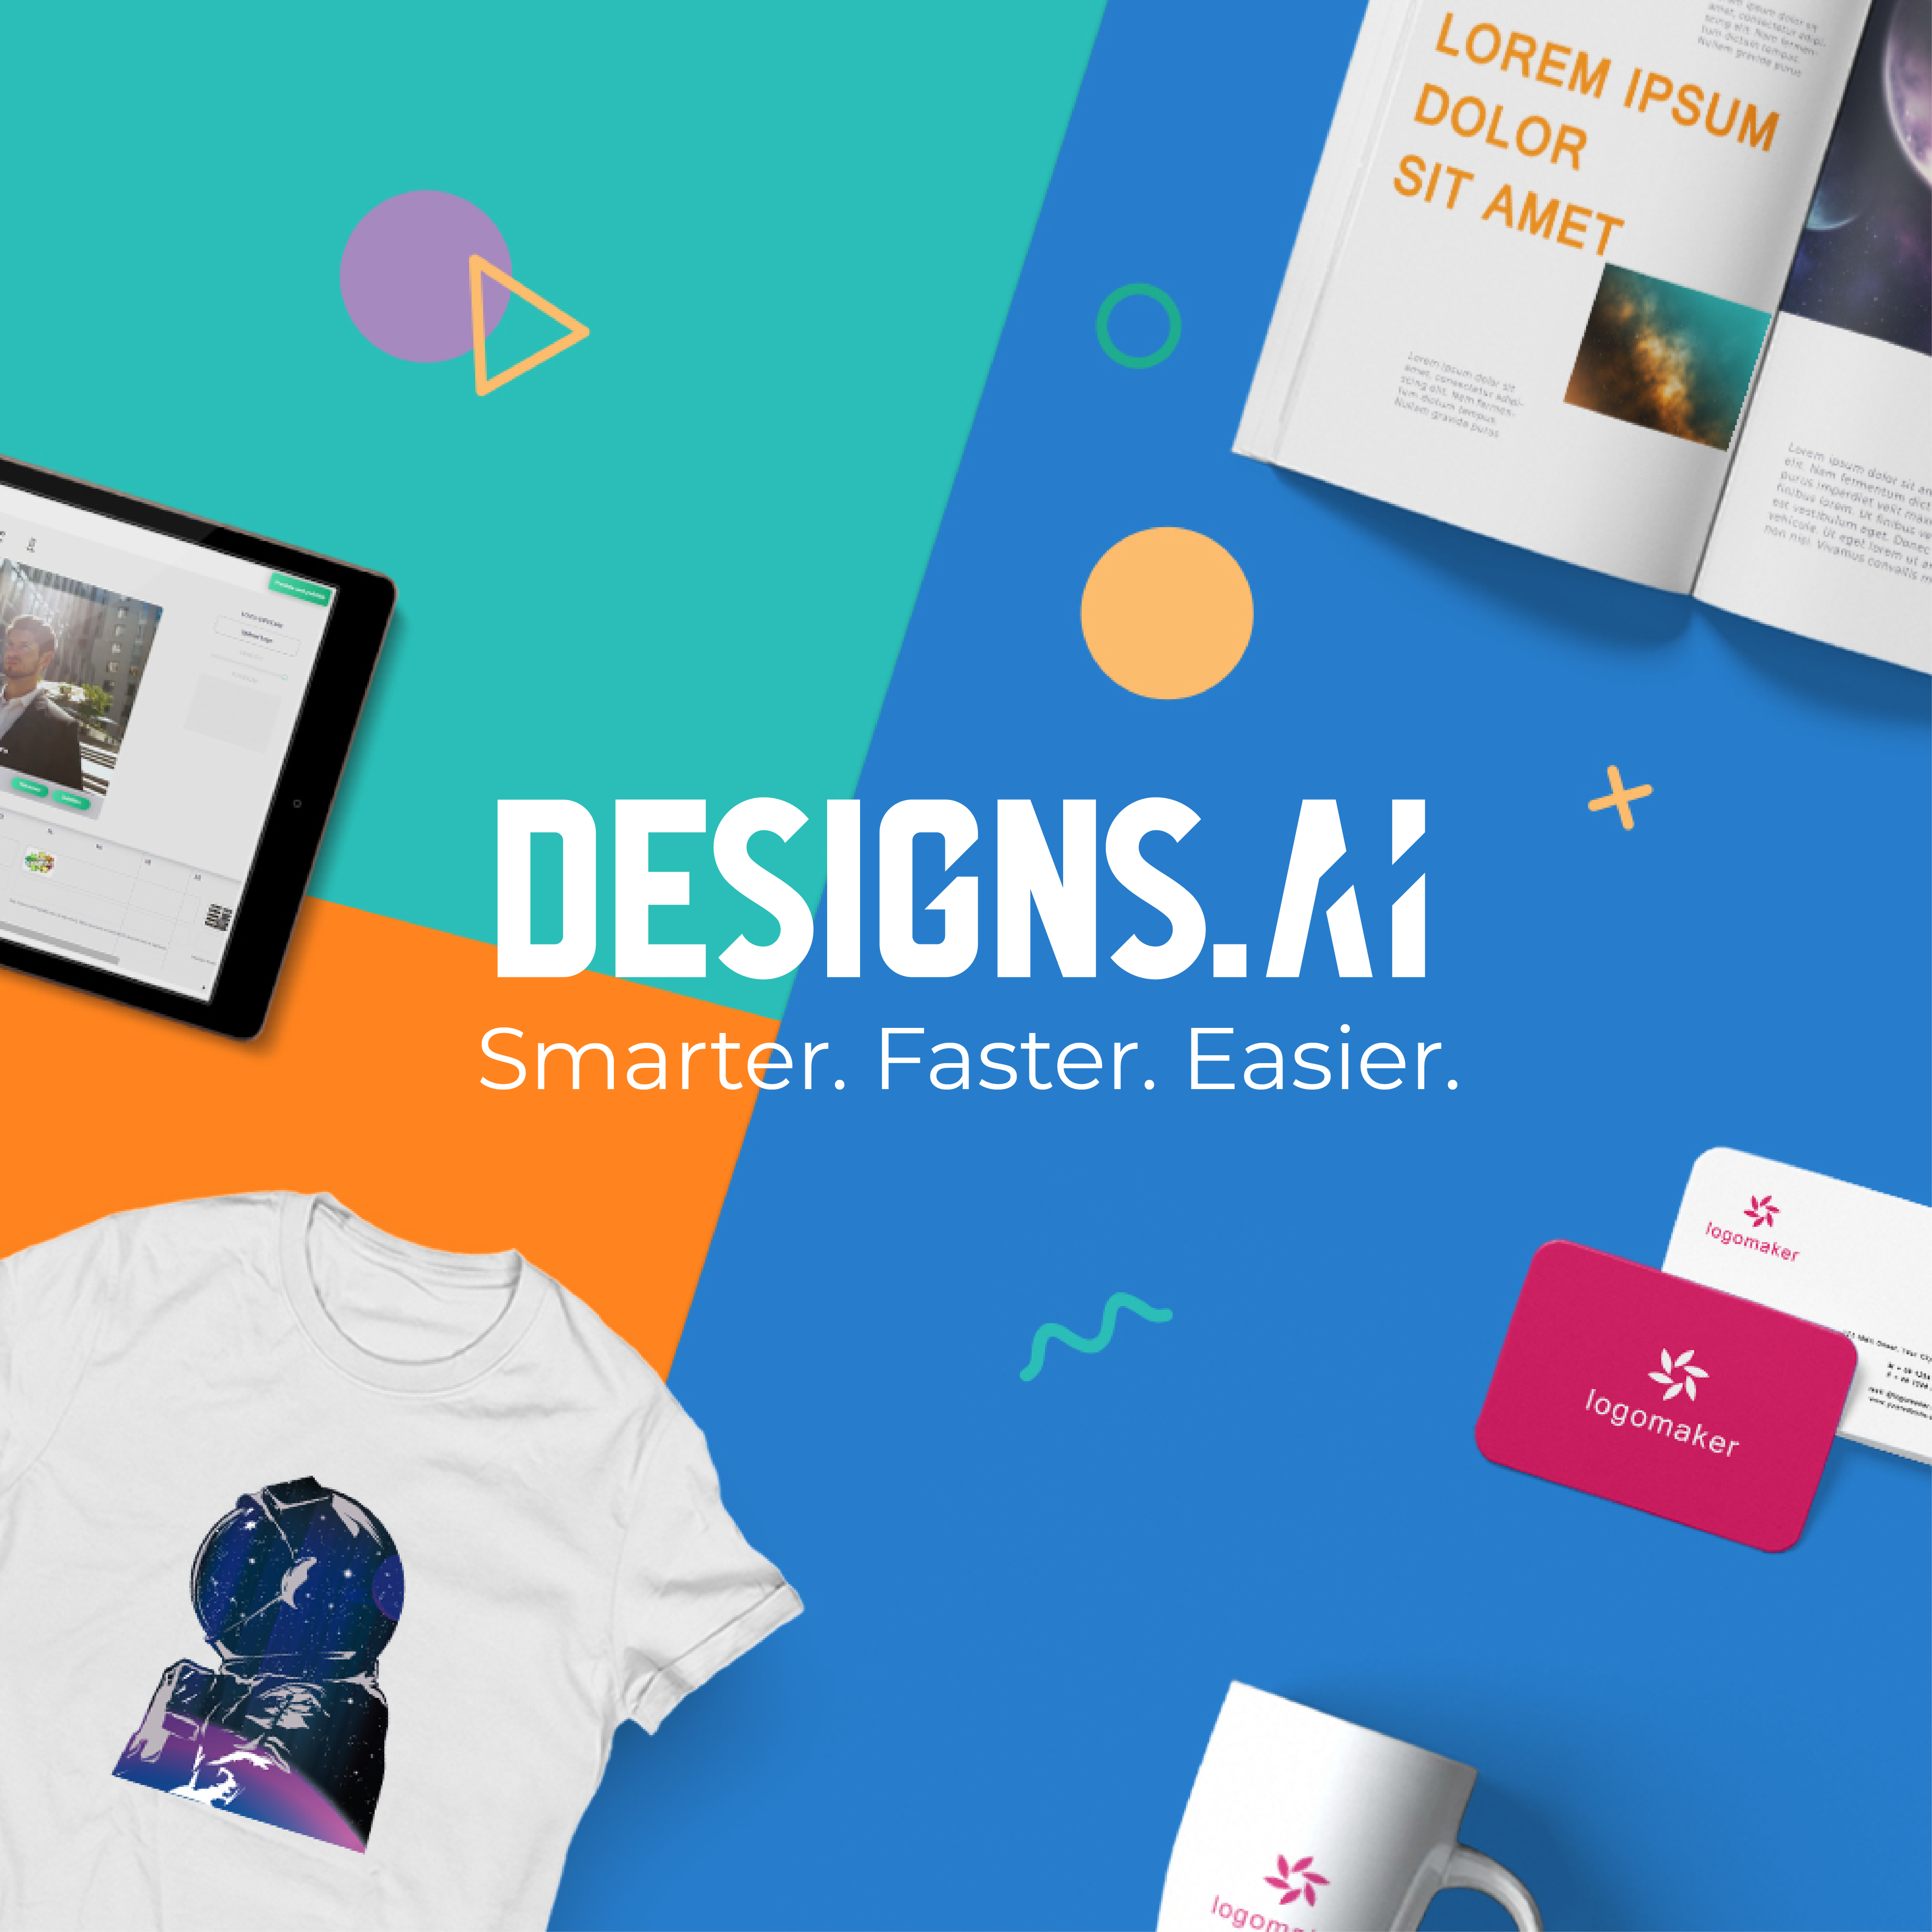 Introducing The New All-In-One Marketing Tool - Designs.ai